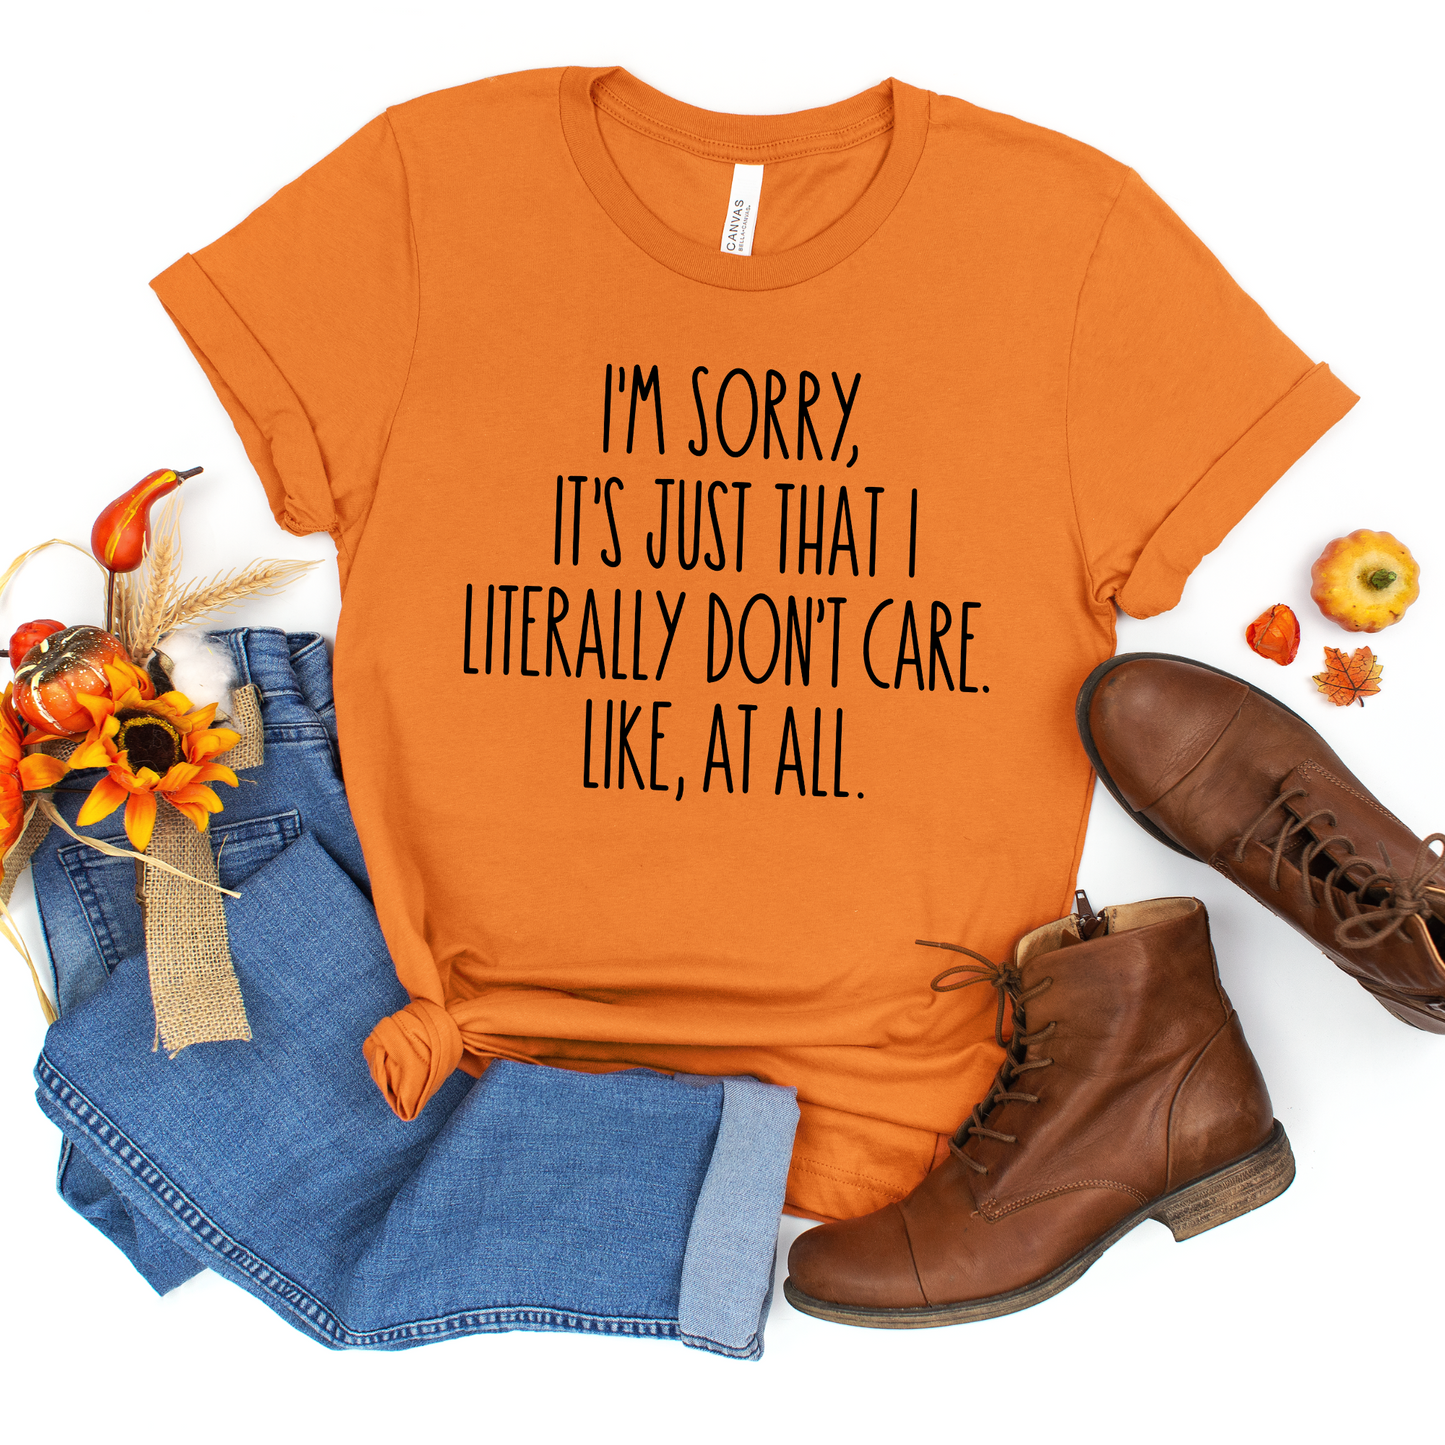 I'm Sorry, It's Just That I Literally Don't Care, Like At All Crewneck Tee